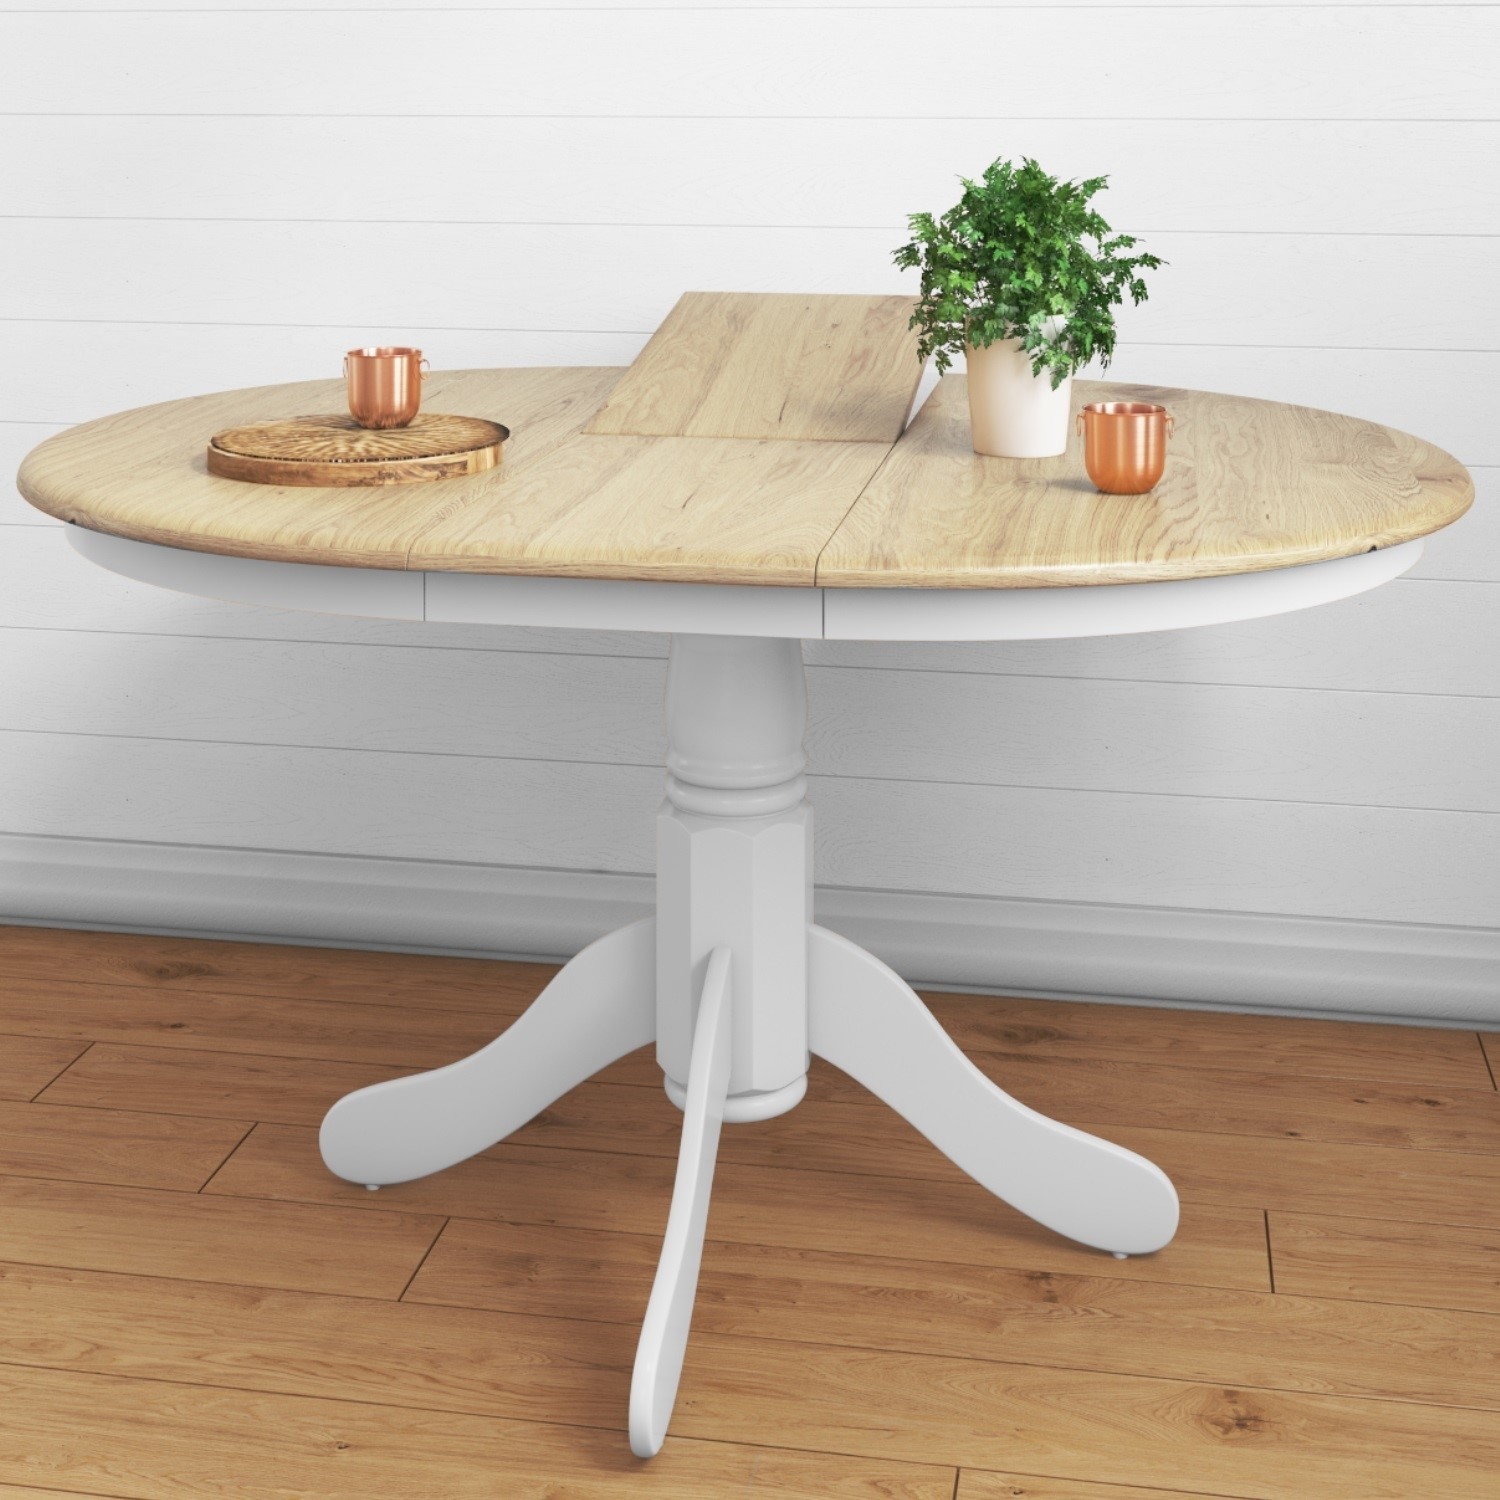 Extendable Round Wooden Dining Table in White/Natural - 6 Seater